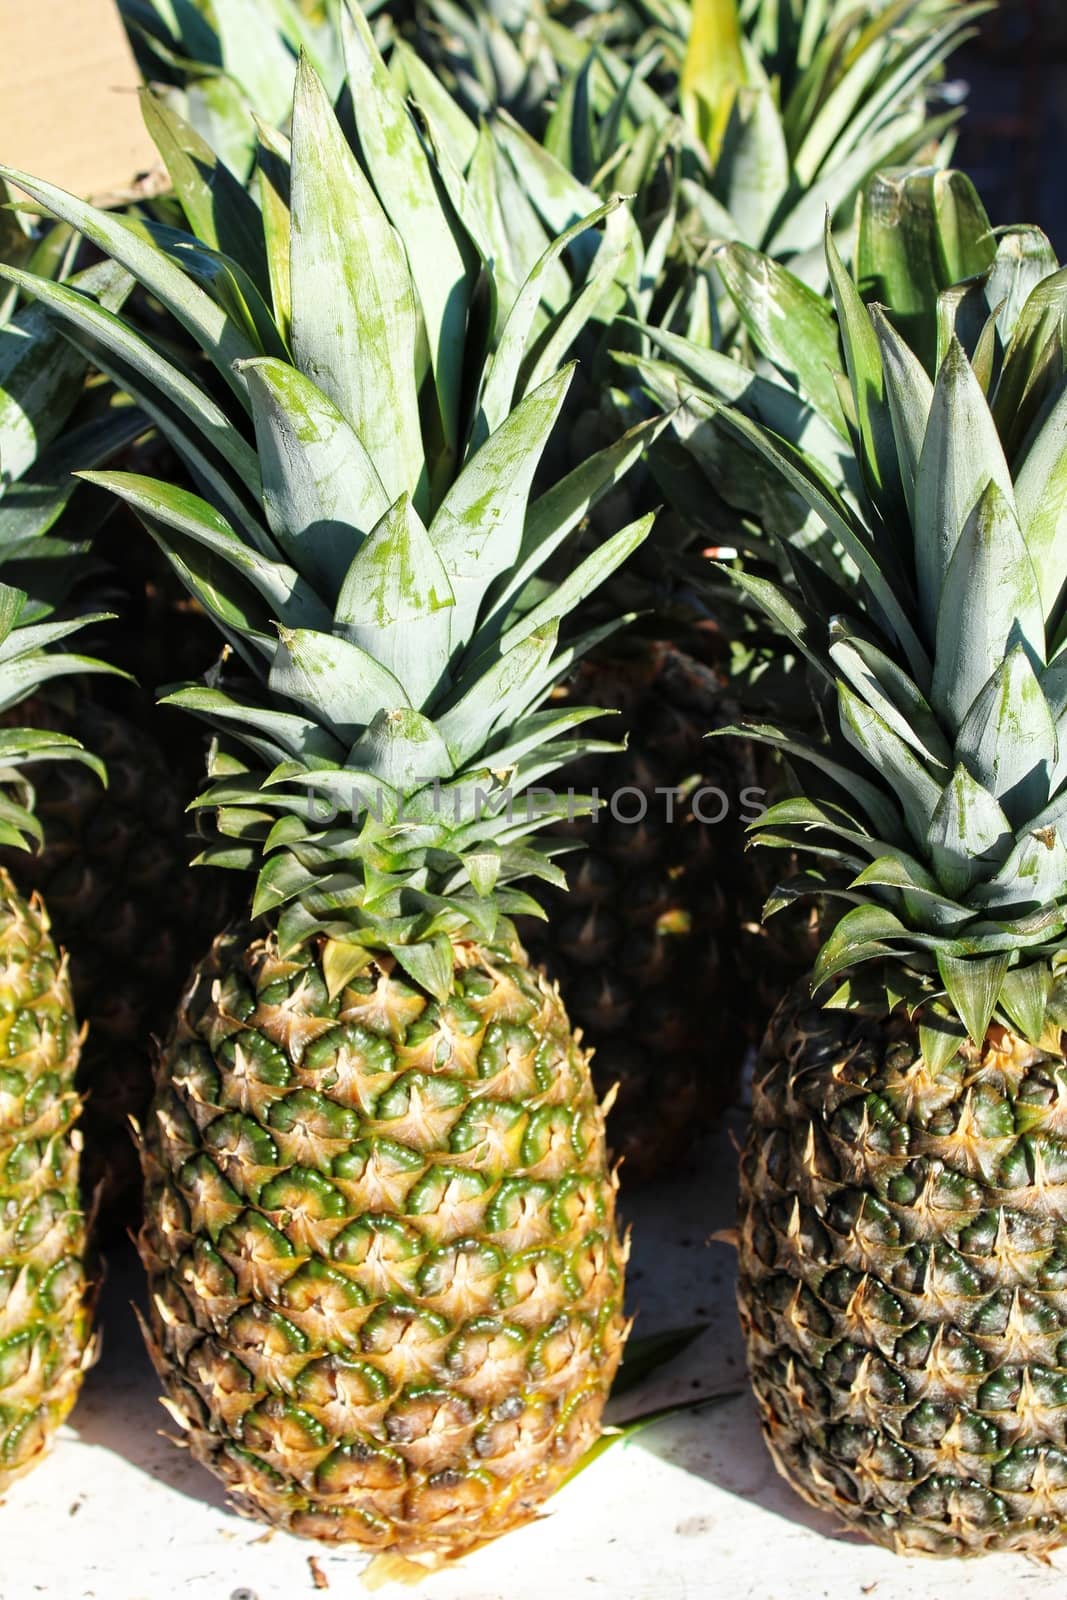 Colorful pineapples at a market stall by soniabonet